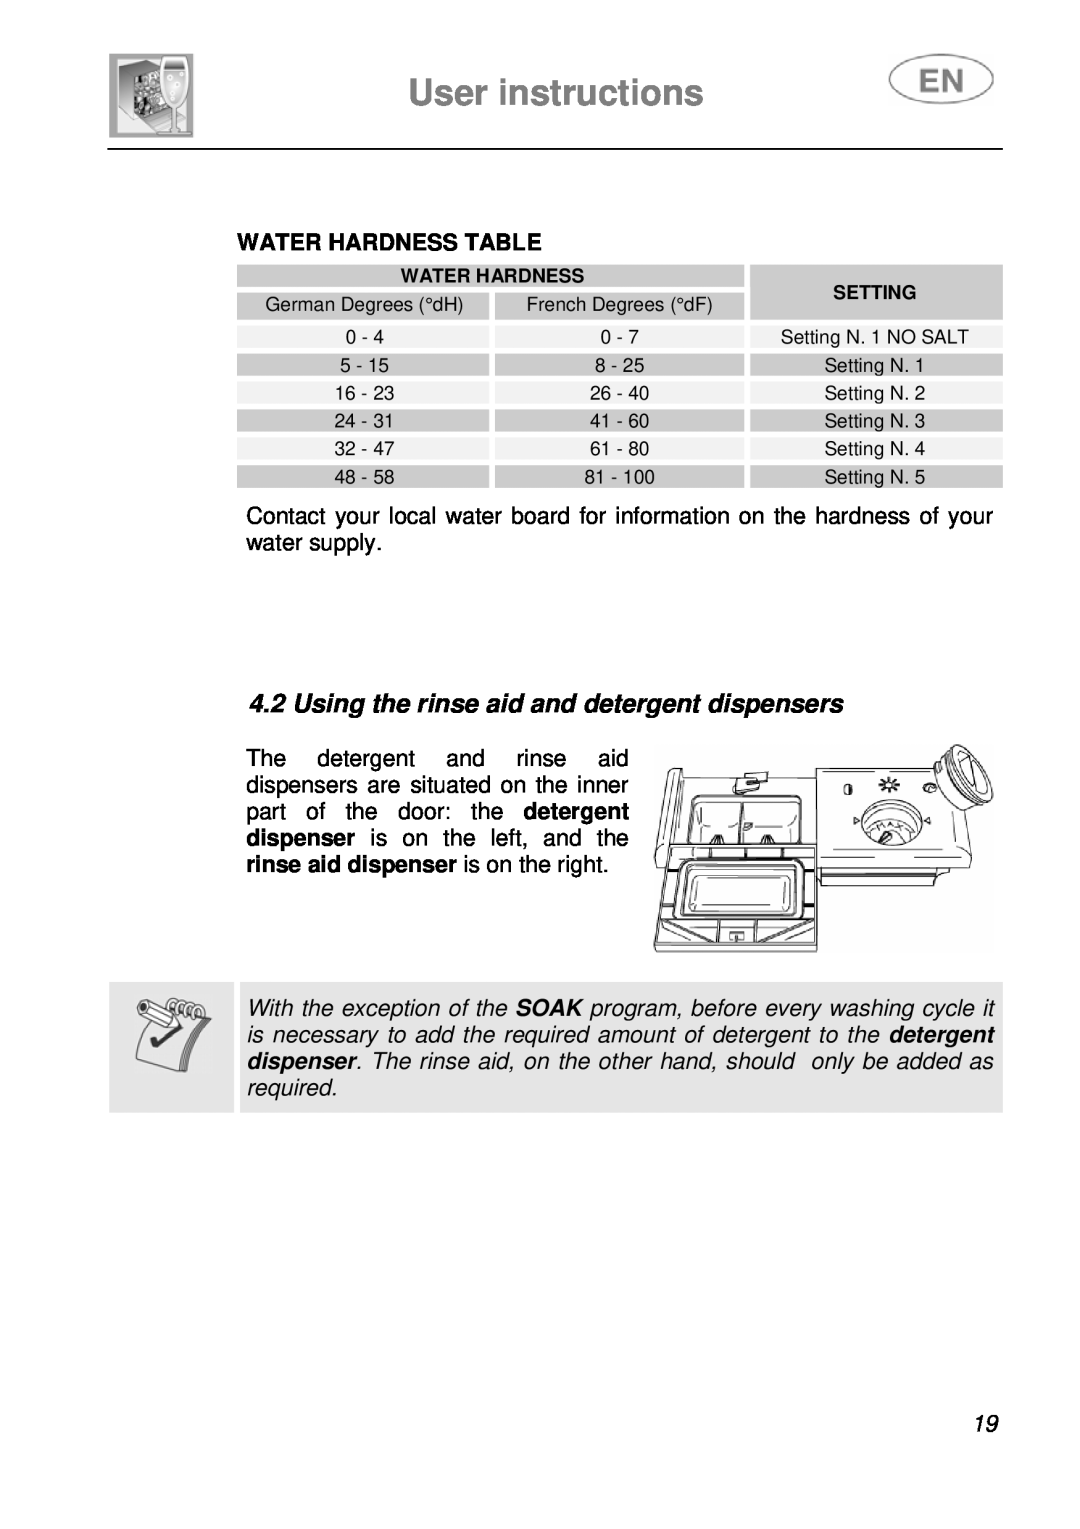 Smeg LS19-7 instruction manual User instructions, Using the rinse aid and detergent dispensers, Water Hardness Table 